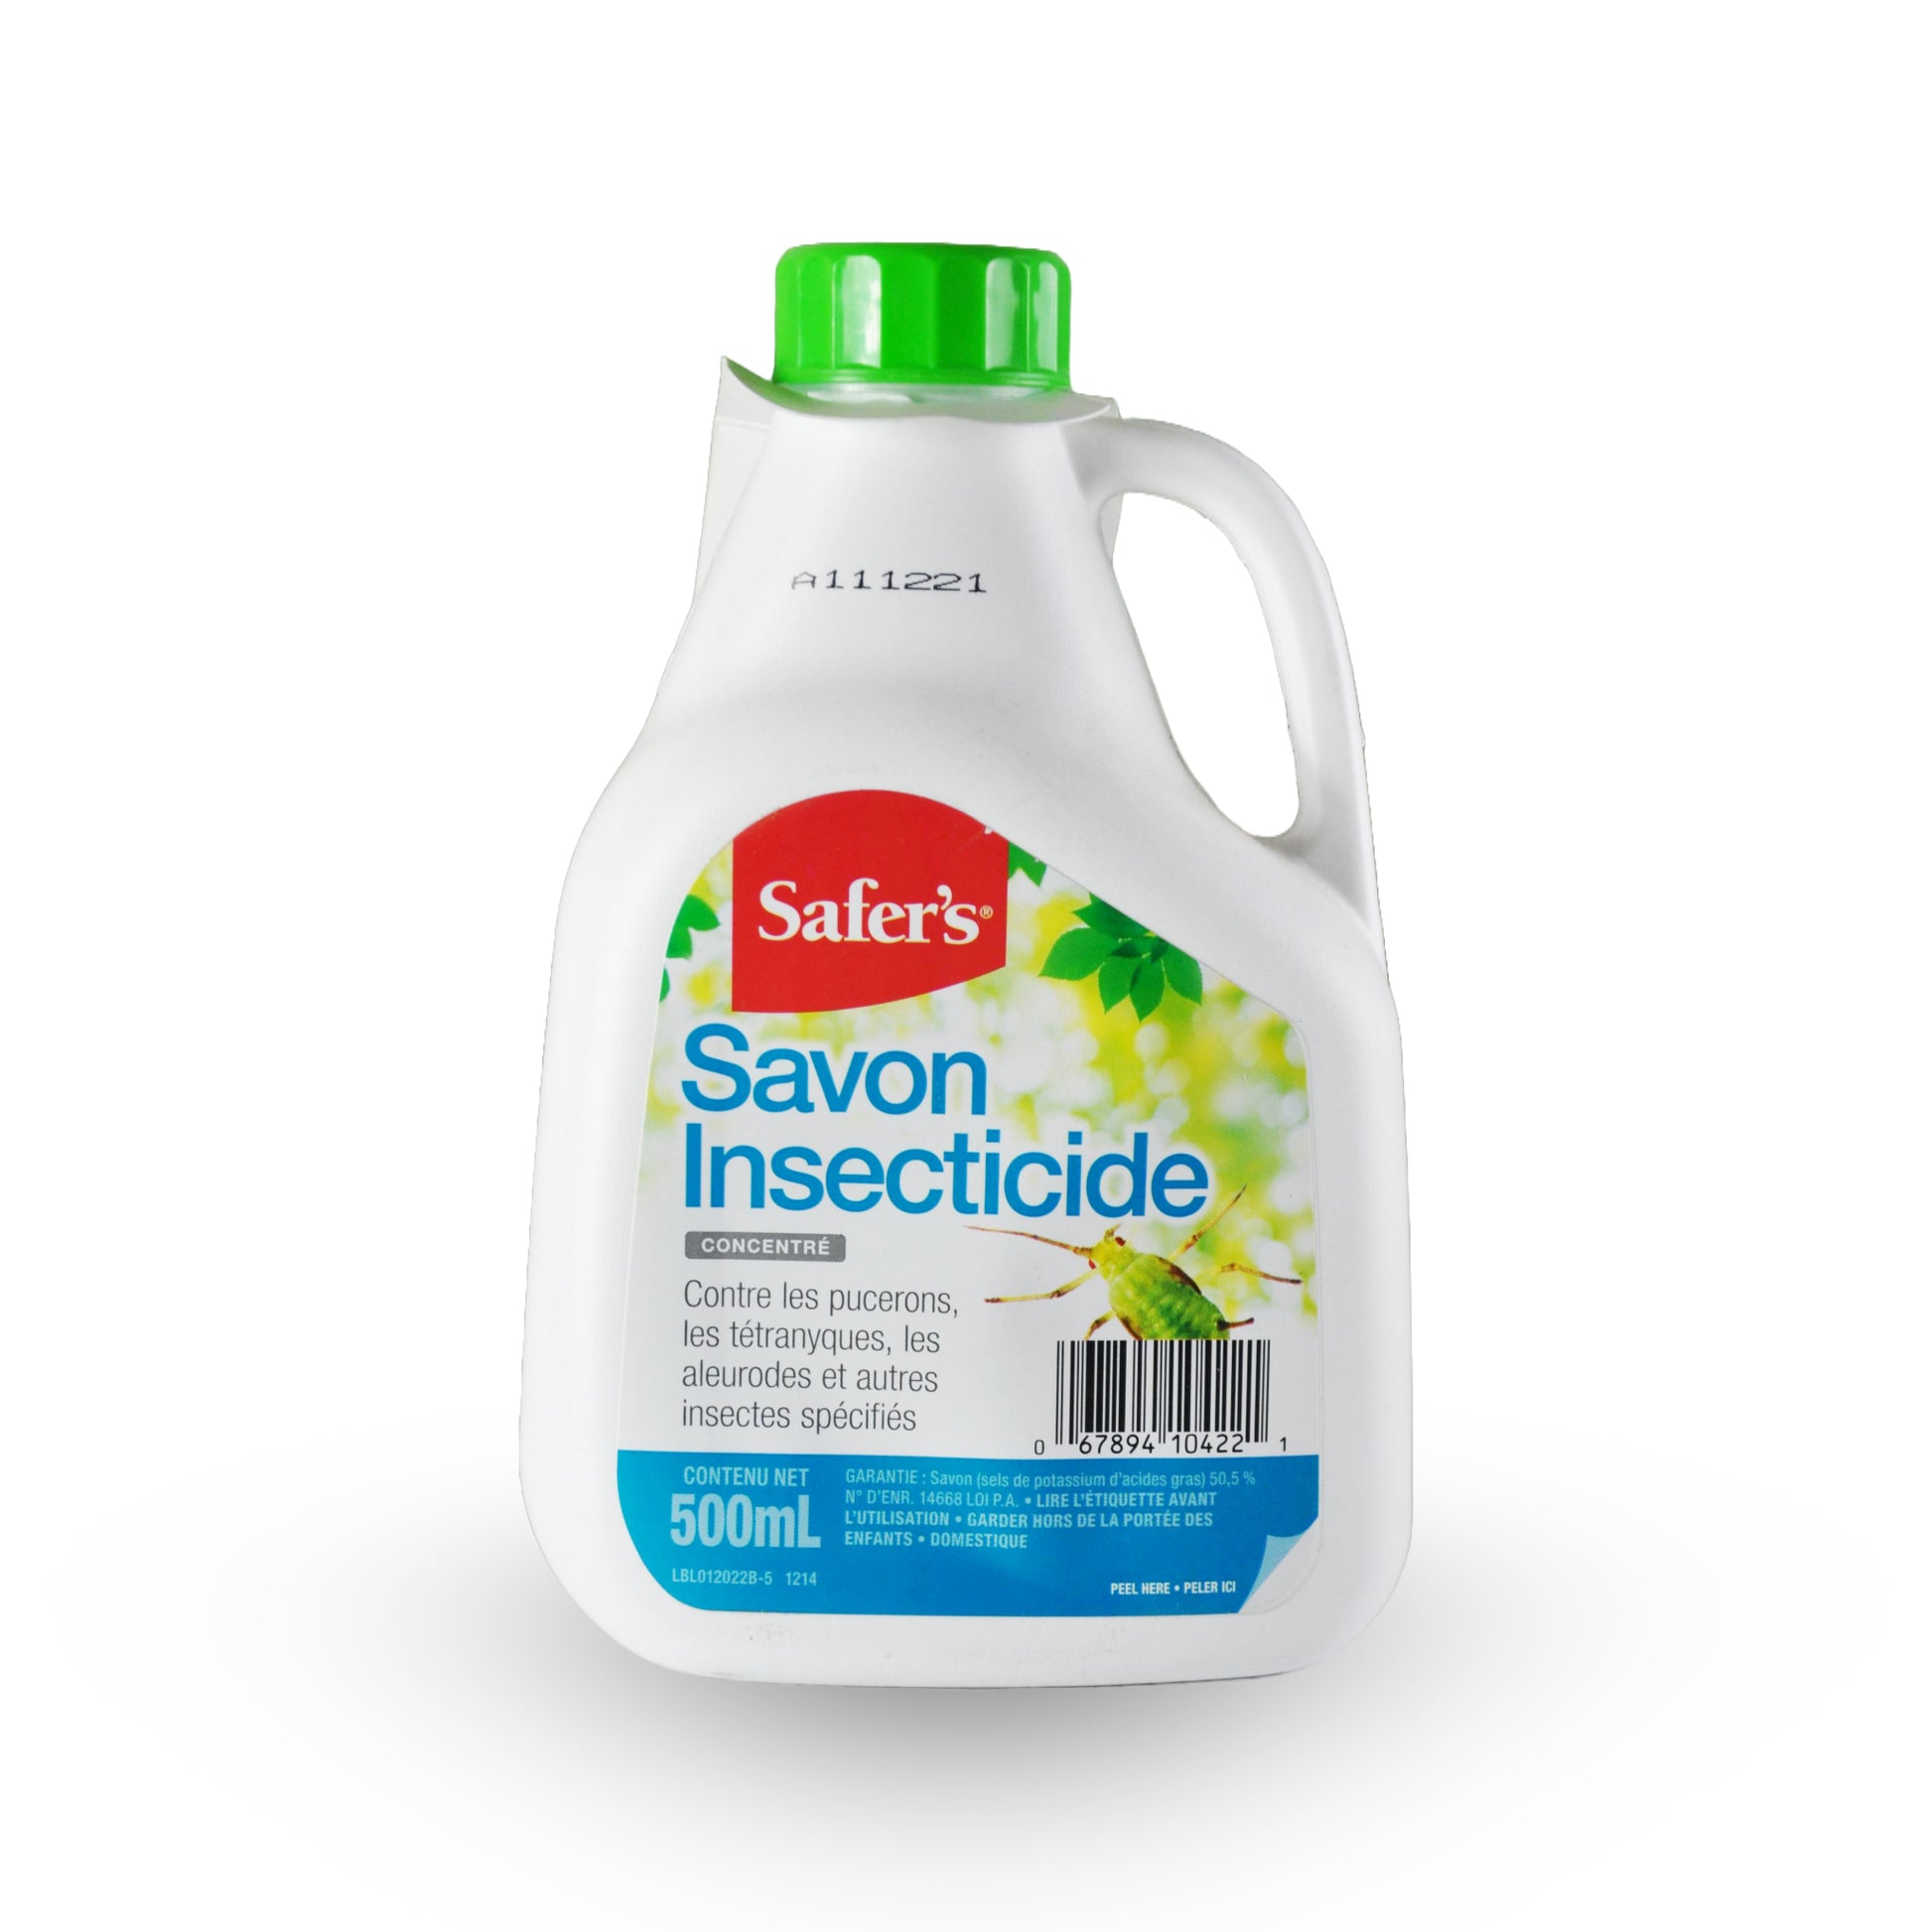 SAFER'S, Savon Insecticide 500ml